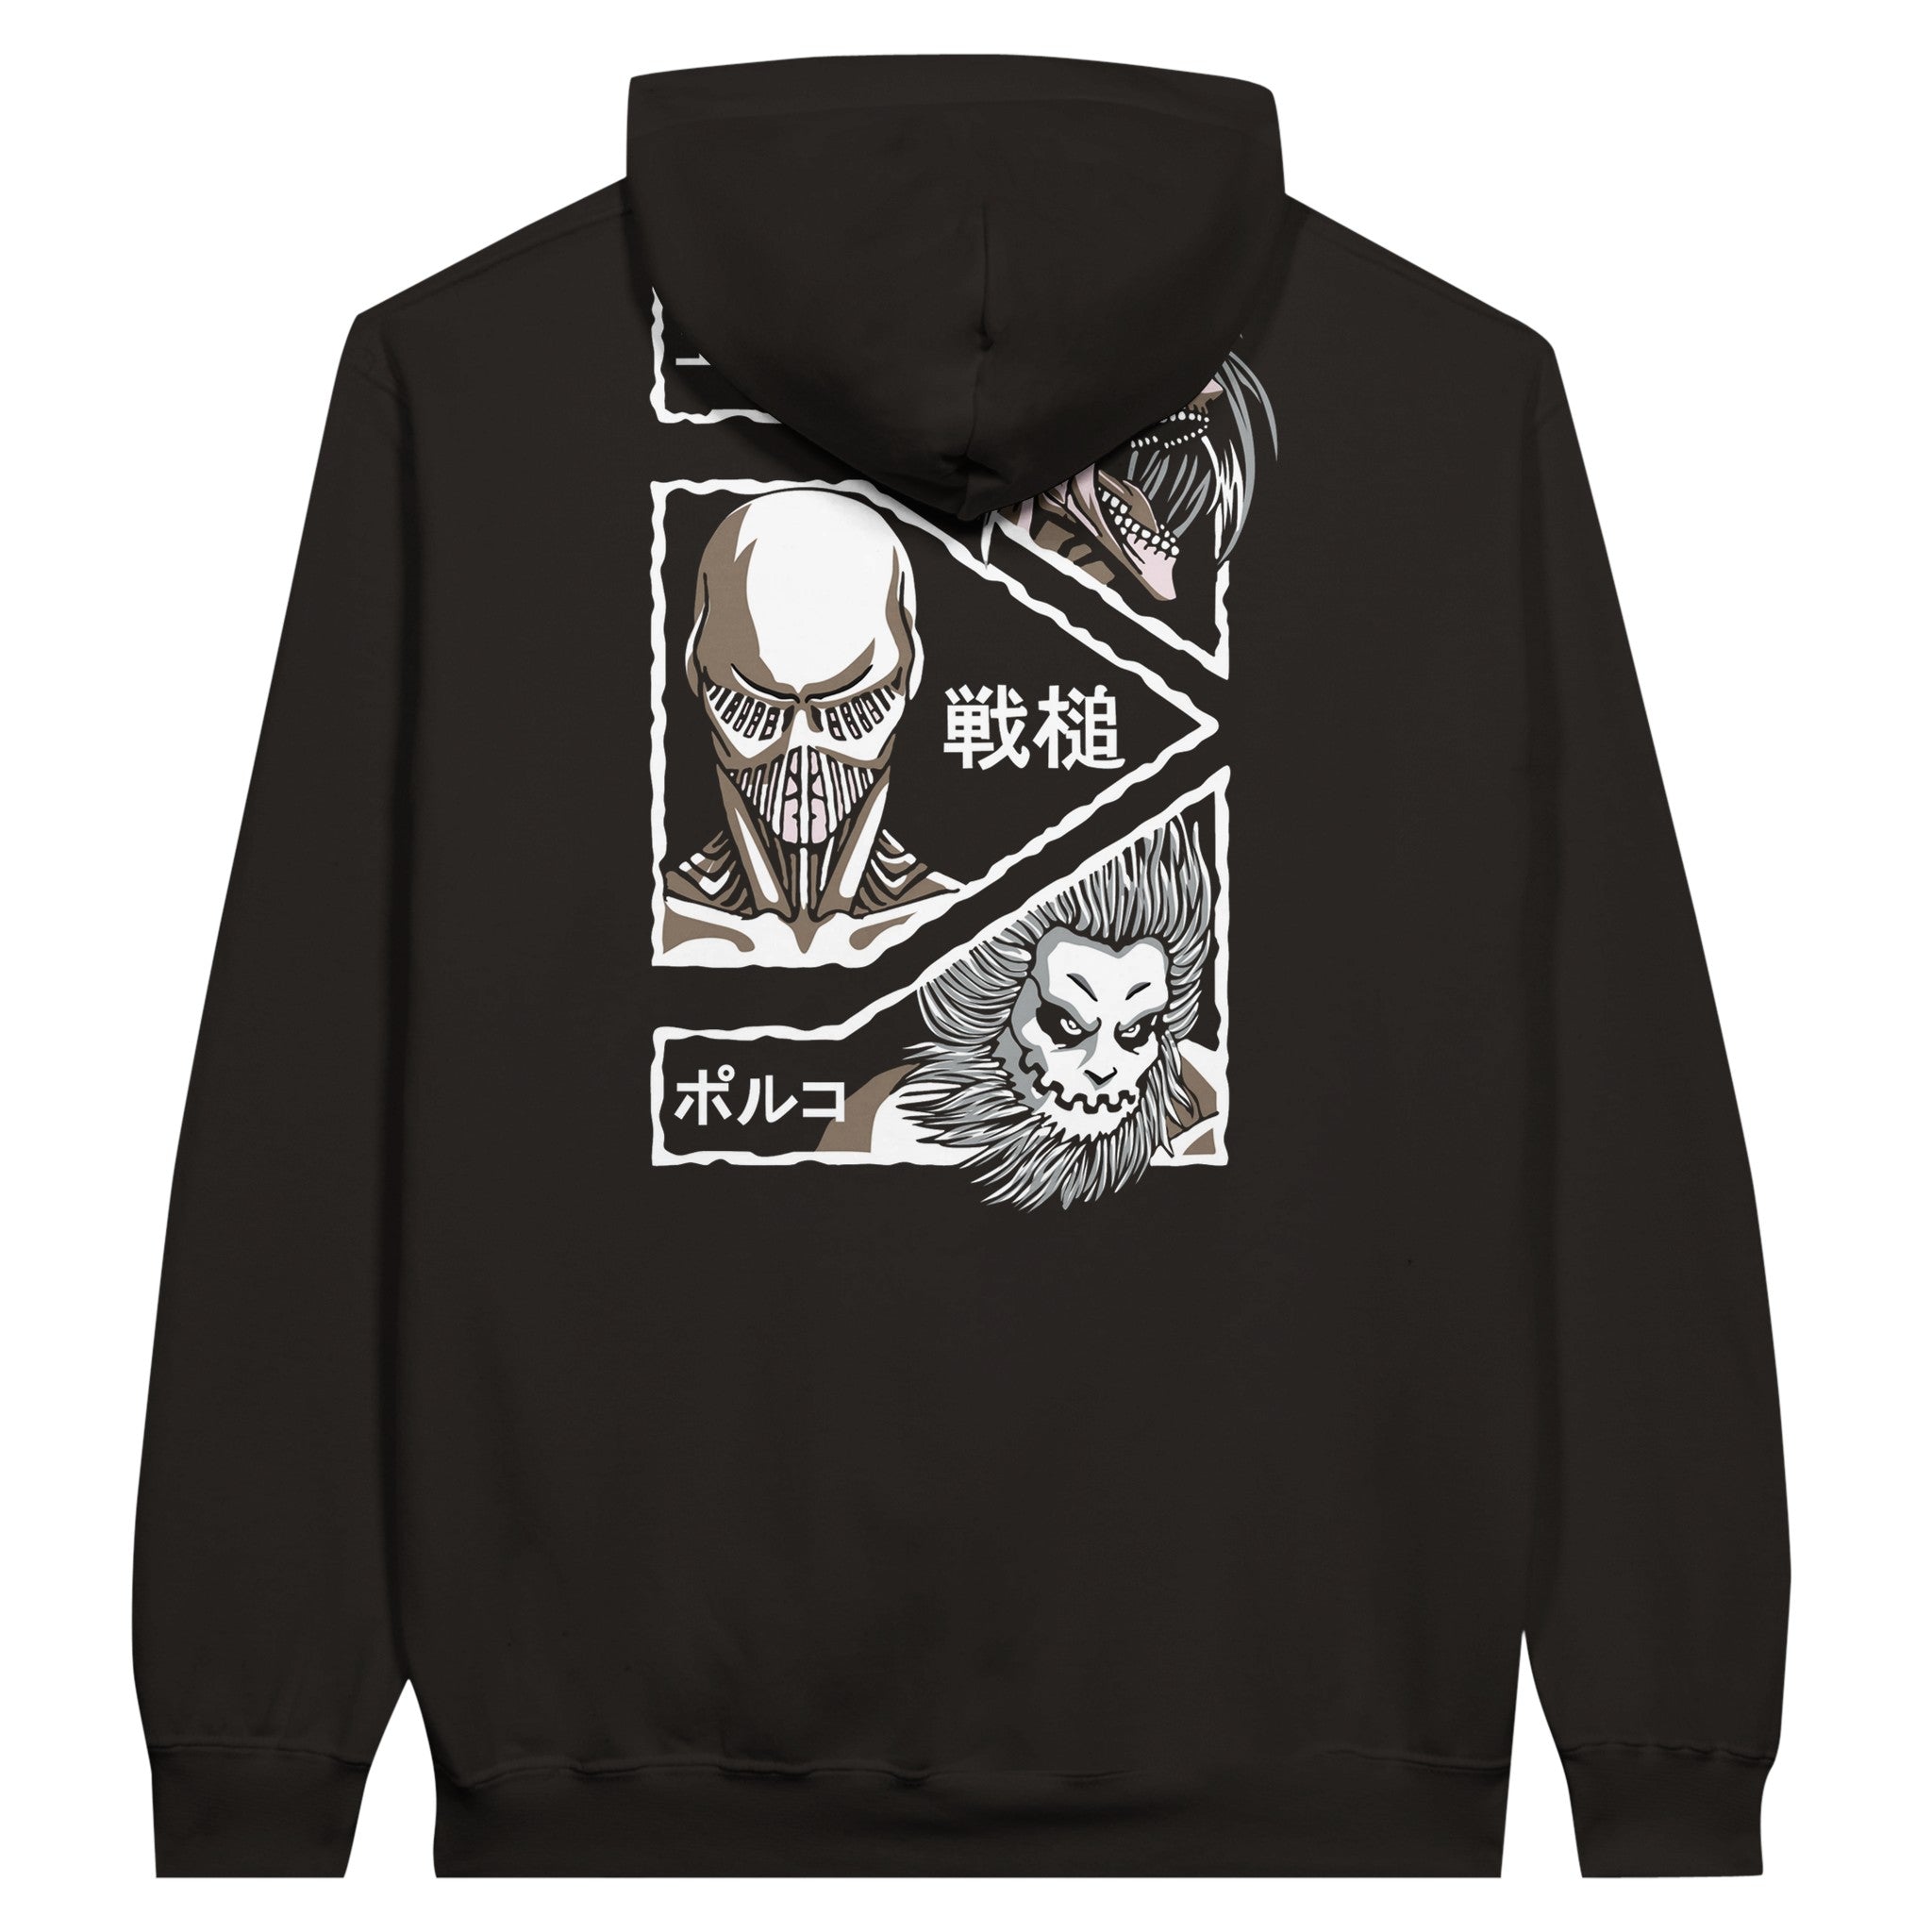 shop and buy attack on titan anime clothing hoodie war hammer